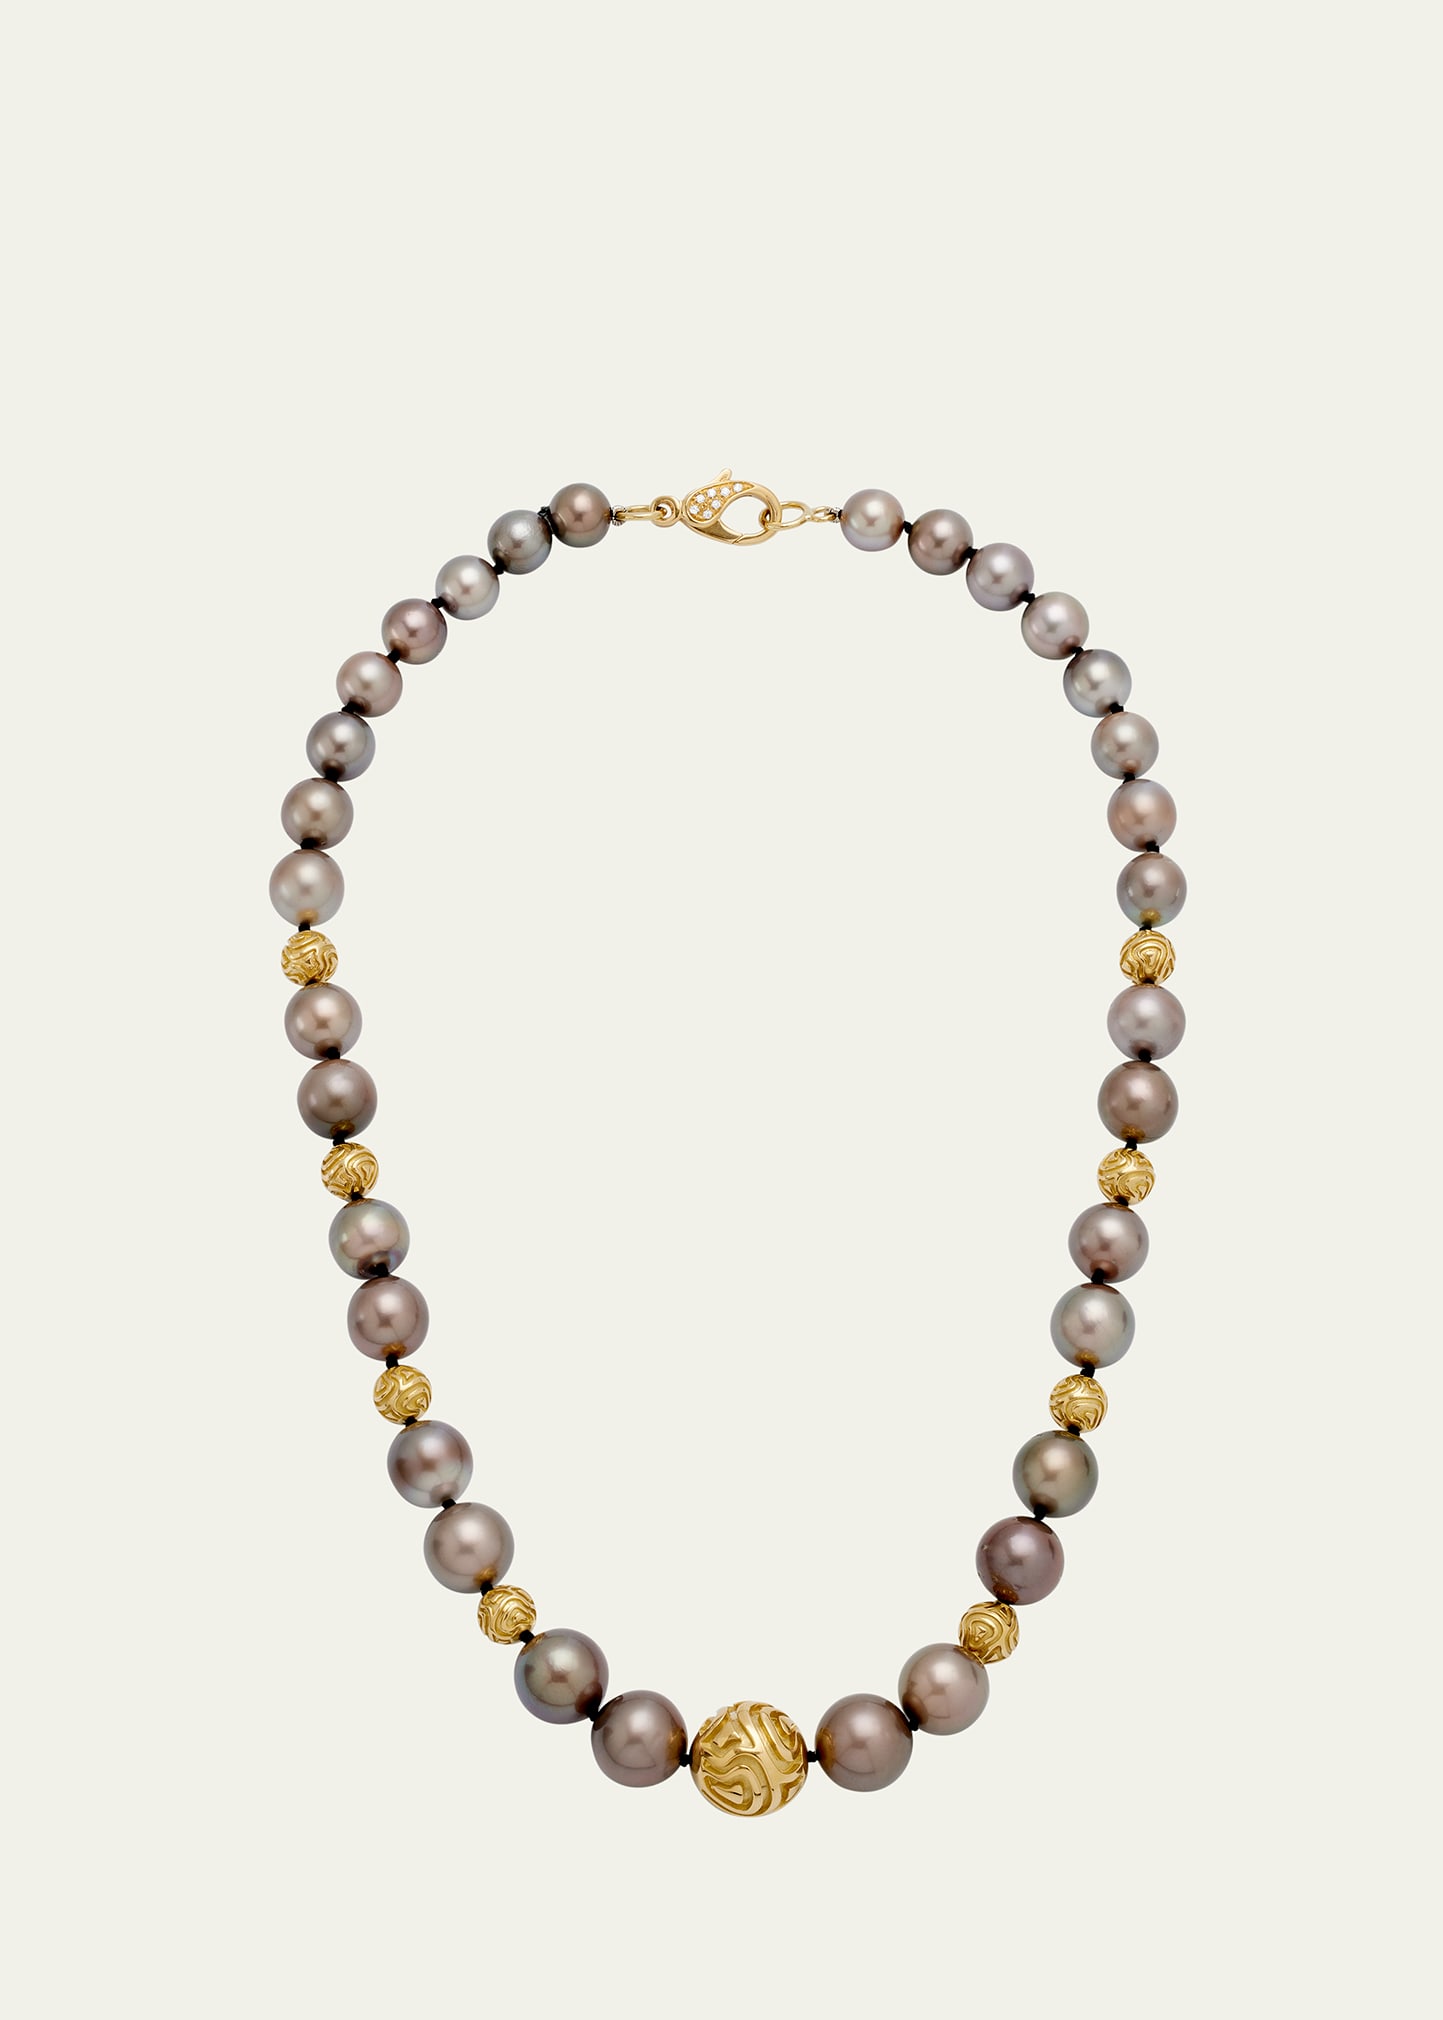 Kimberly Mcdonald Gold Bead Necklace With Pearl, Agate, And Diamonds